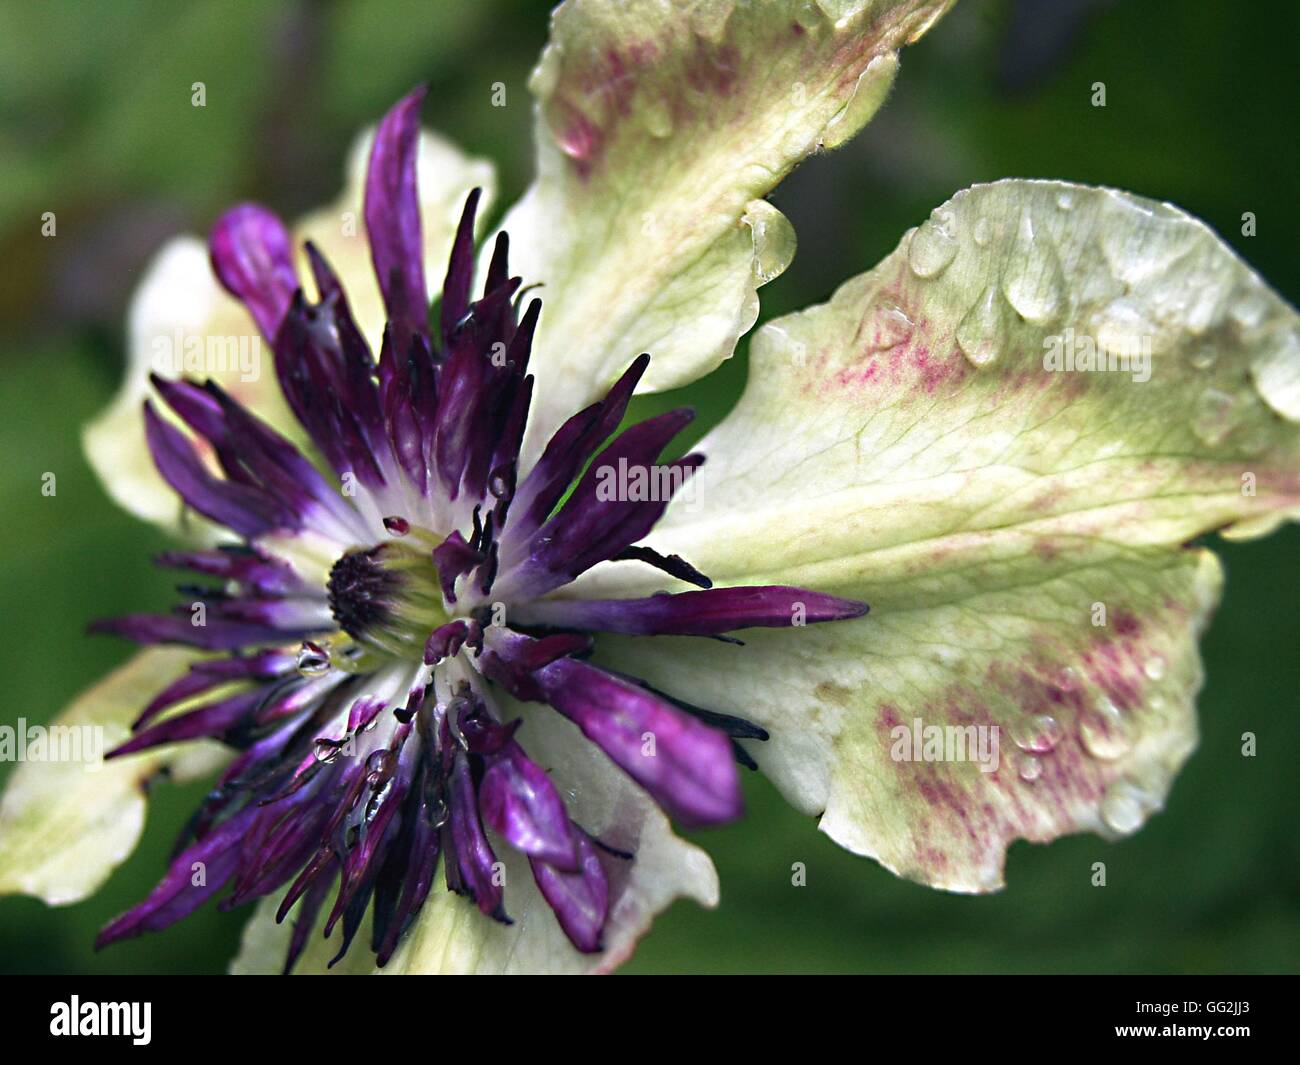 Clematis florida var. Sieboldii with raindrops. Climber with single creamy white flowers with a domed boss of purple stamens. Originates from Eastern China and Japan. Stock Photo